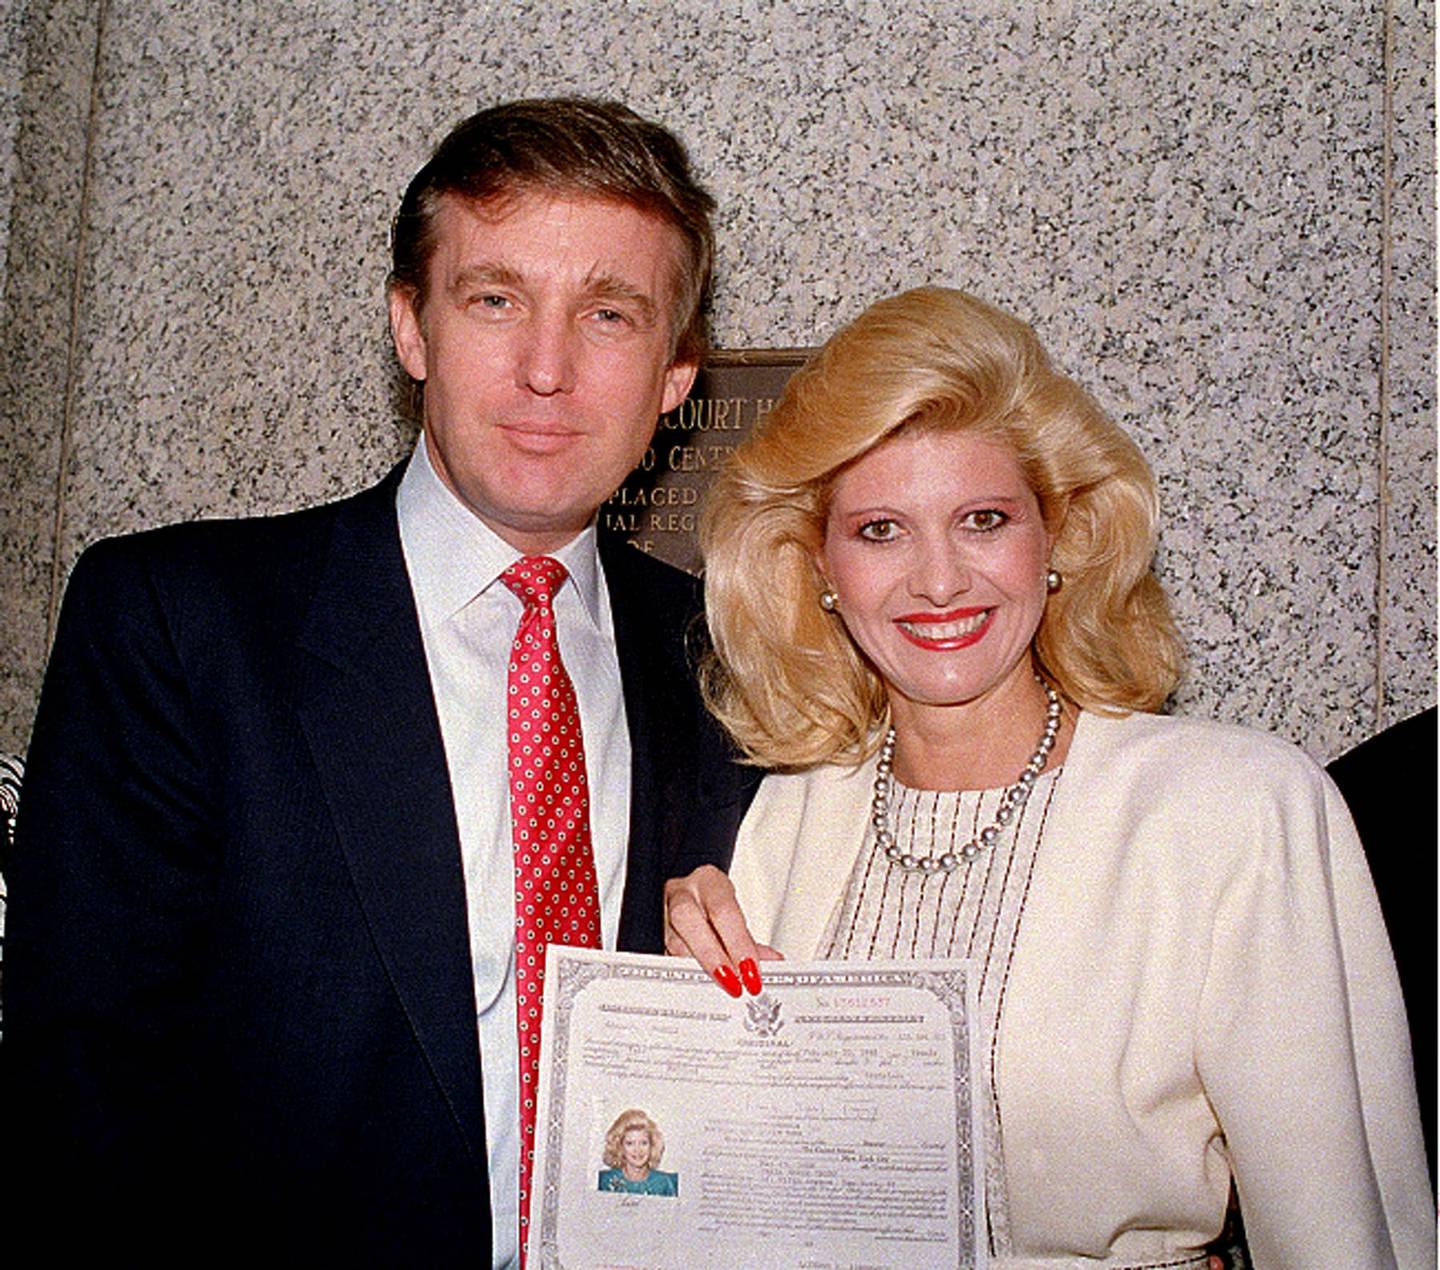 Donald Trump and his wife, Ivana, pose outside the Federal Courthouse after she was sworn in as a United States citizen, May 1988. (ASSOCIATED PRESS)